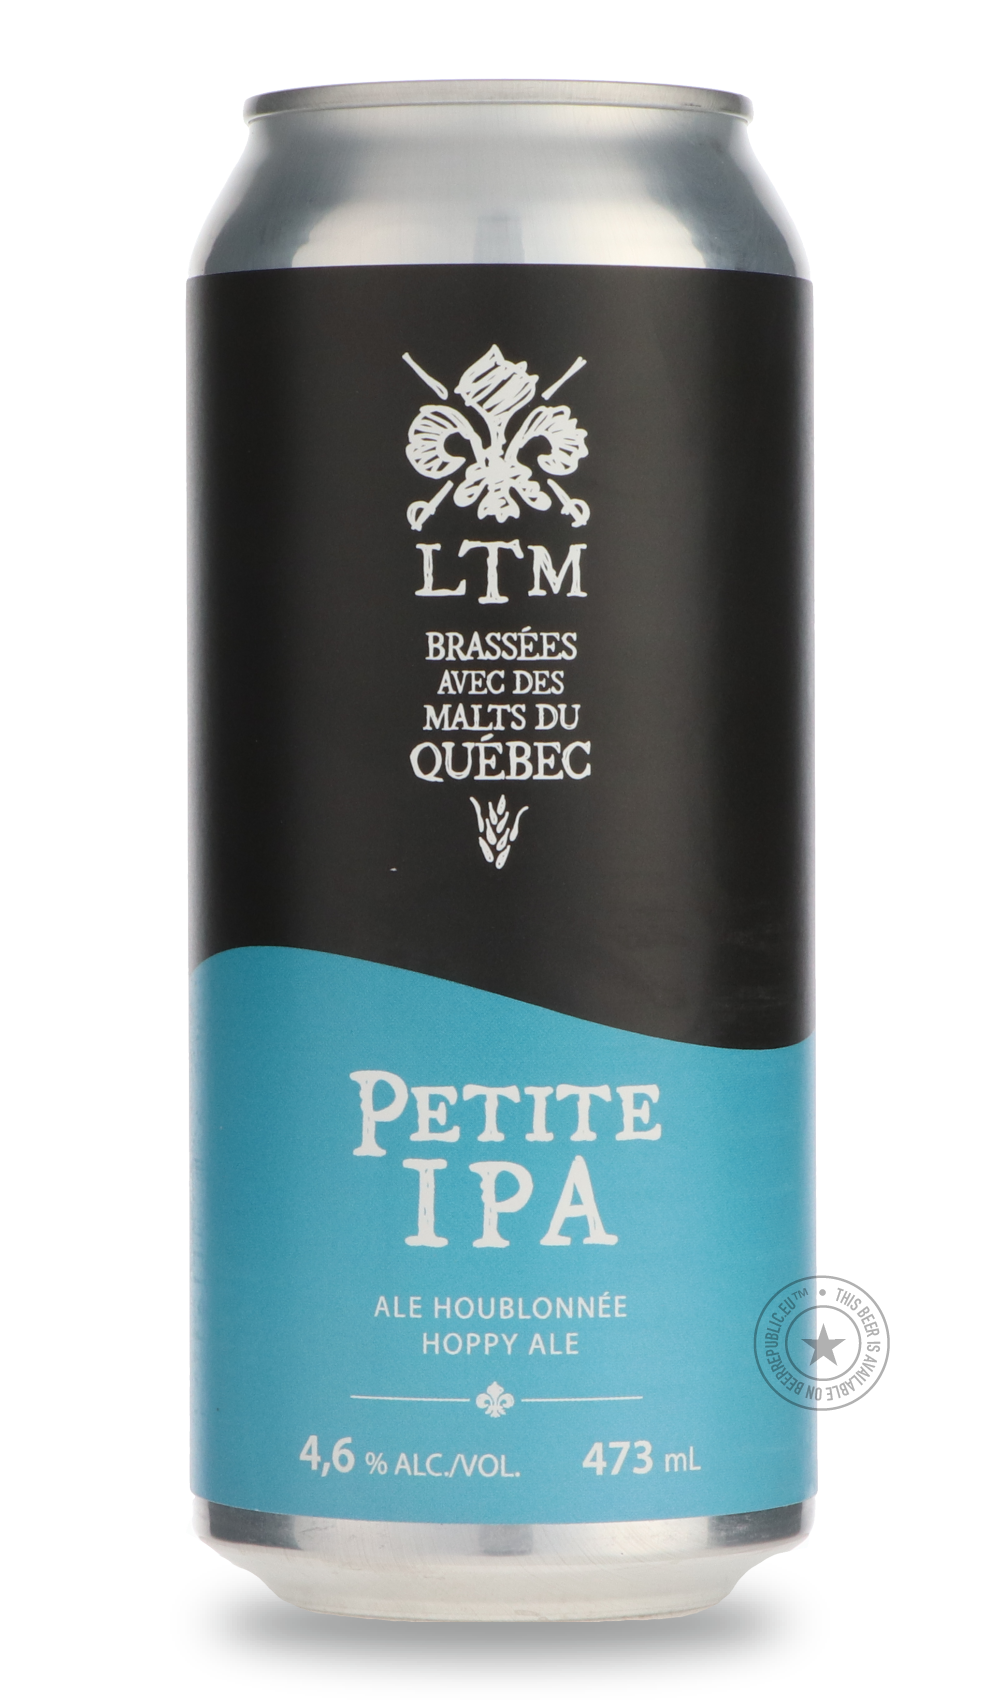 -Les Trois Mousquetaires- Petite IPA-IPA- Only @ Beer Republic - The best online beer store for American & Canadian craft beer - Buy beer online from the USA and Canada - Bier online kopen - Amerikaans bier kopen - Craft beer store - Craft beer kopen - Amerikanisch bier kaufen - Bier online kaufen - Acheter biere online - IPA - Stout - Porter - New England IPA - Hazy IPA - Imperial Stout - Barrel Aged - Barrel Aged Imperial Stout - Brown - Dark beer - Blond - Blonde - Pilsner - Lager - Wheat - Weizen - Ambe